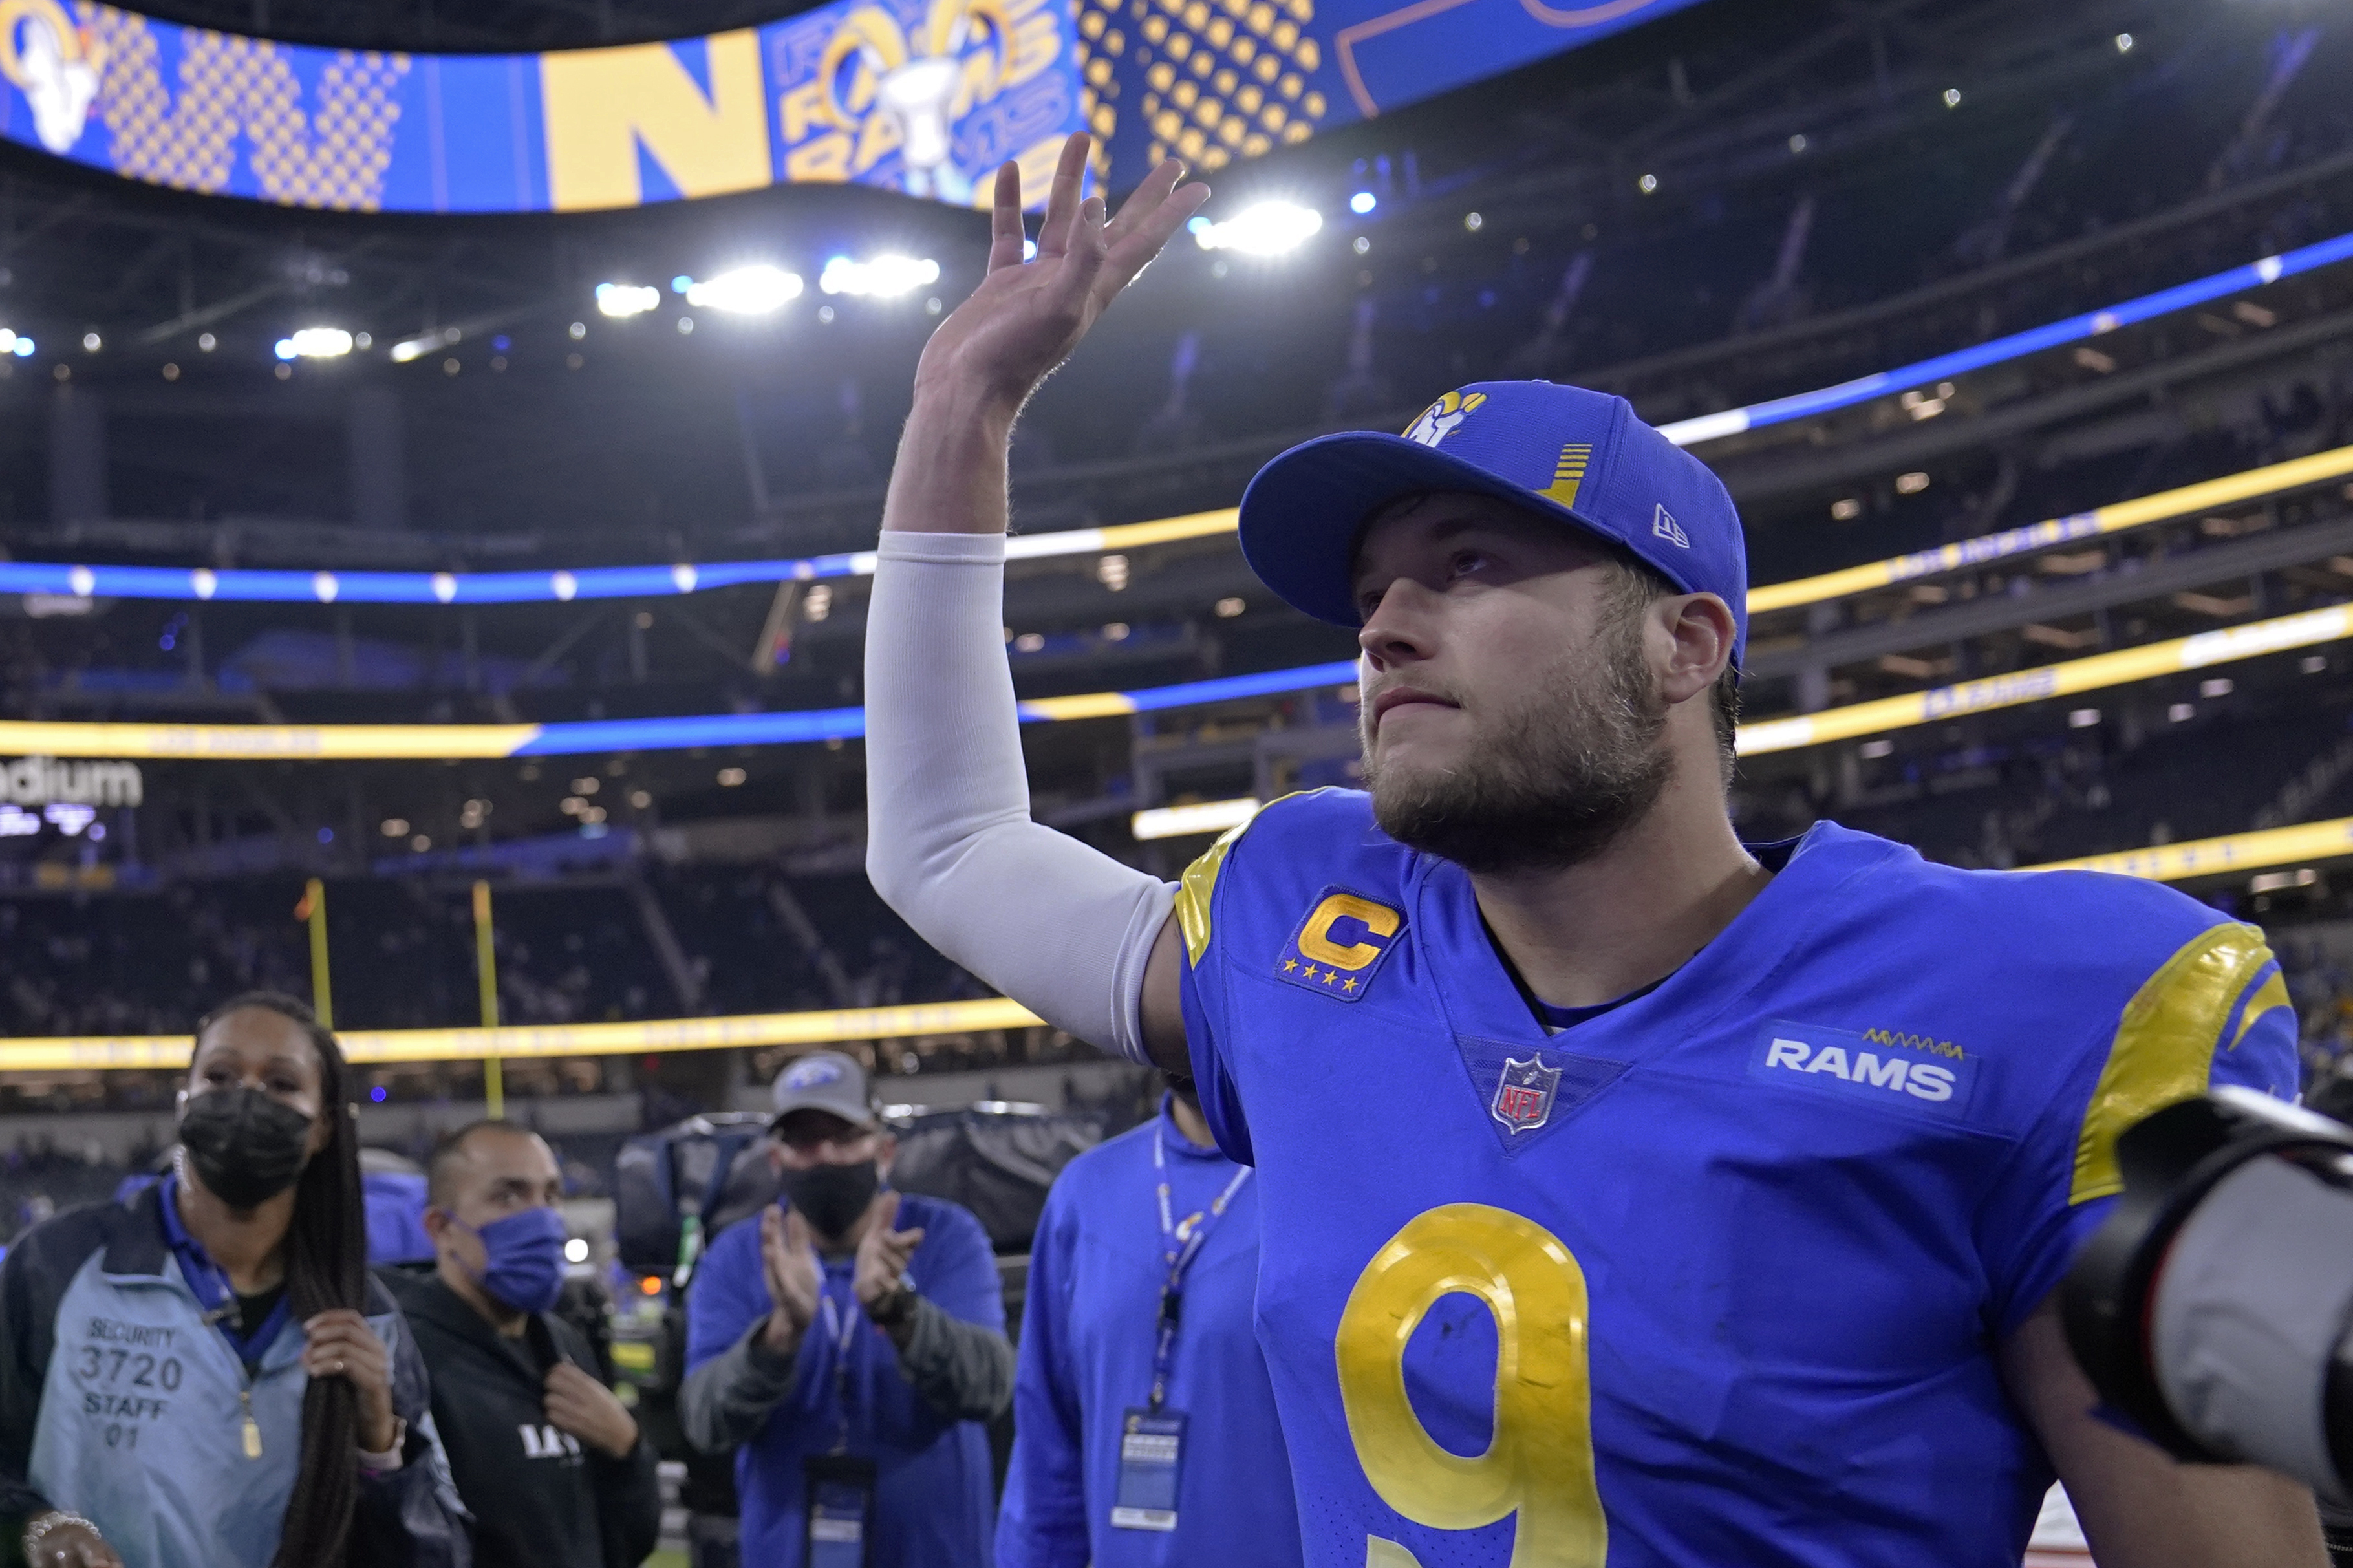 NFC Championship 2019: Celebrate the Rams' win with new gear and